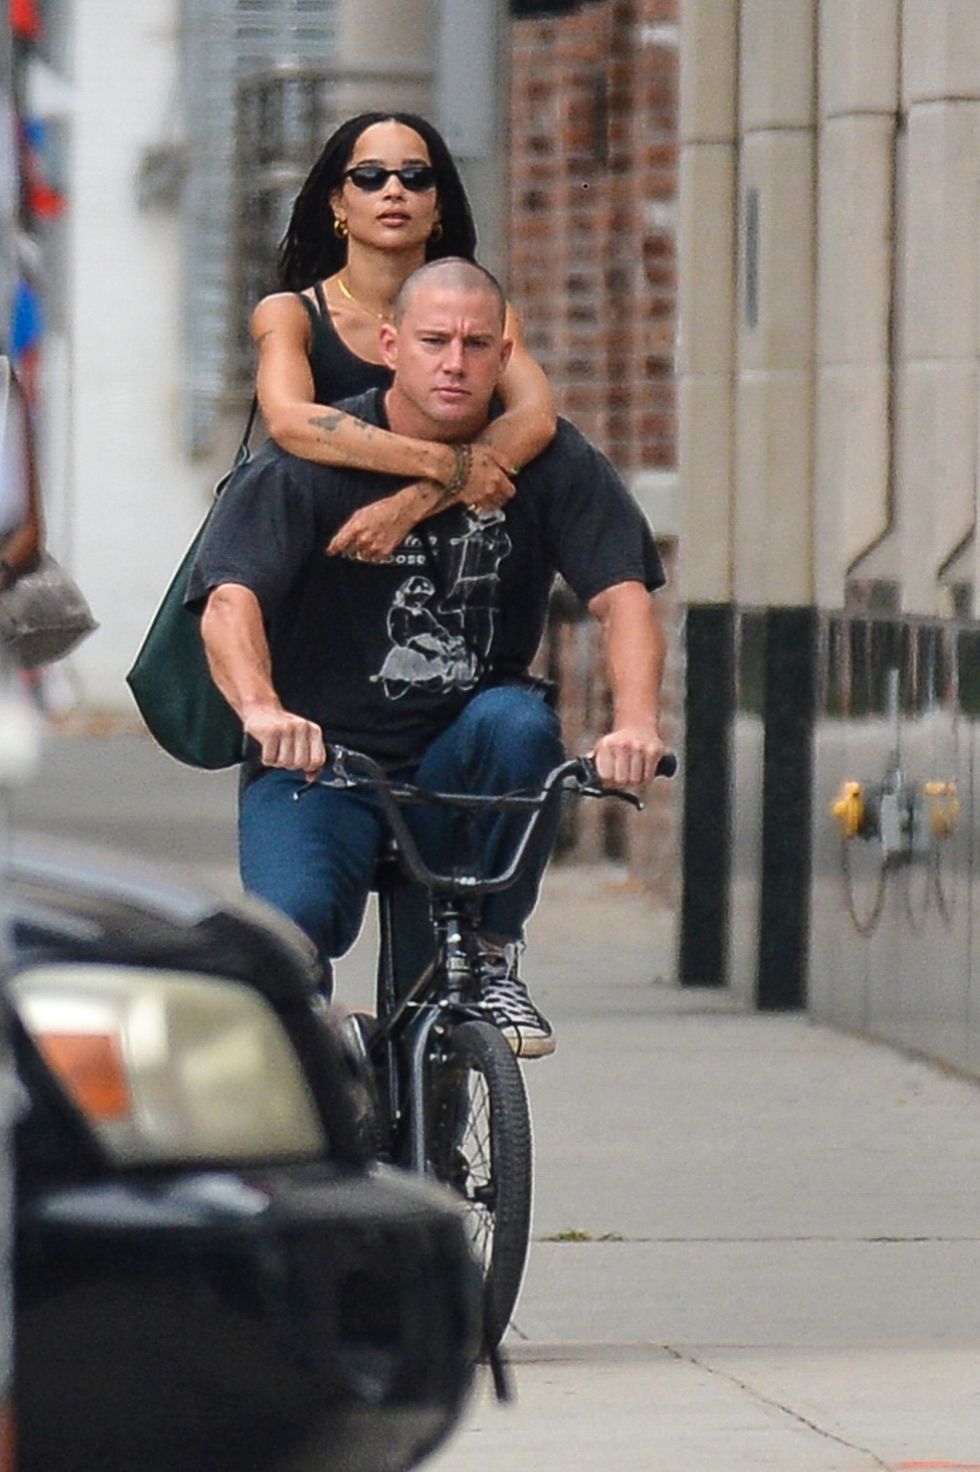 08182021 premium exclusive channing tatum and zoe kravitz are spotted together for the first time in new york city the rumored couple continue to fuel dating rumors as they were spotted on a walk together in the east village, and on a bmx bike ride where zoe wrapped her arms around tatumsalestheimagedirectcom please bylinetheimagedirectcomexclusive please email salestheimagedirectcom for fees before use